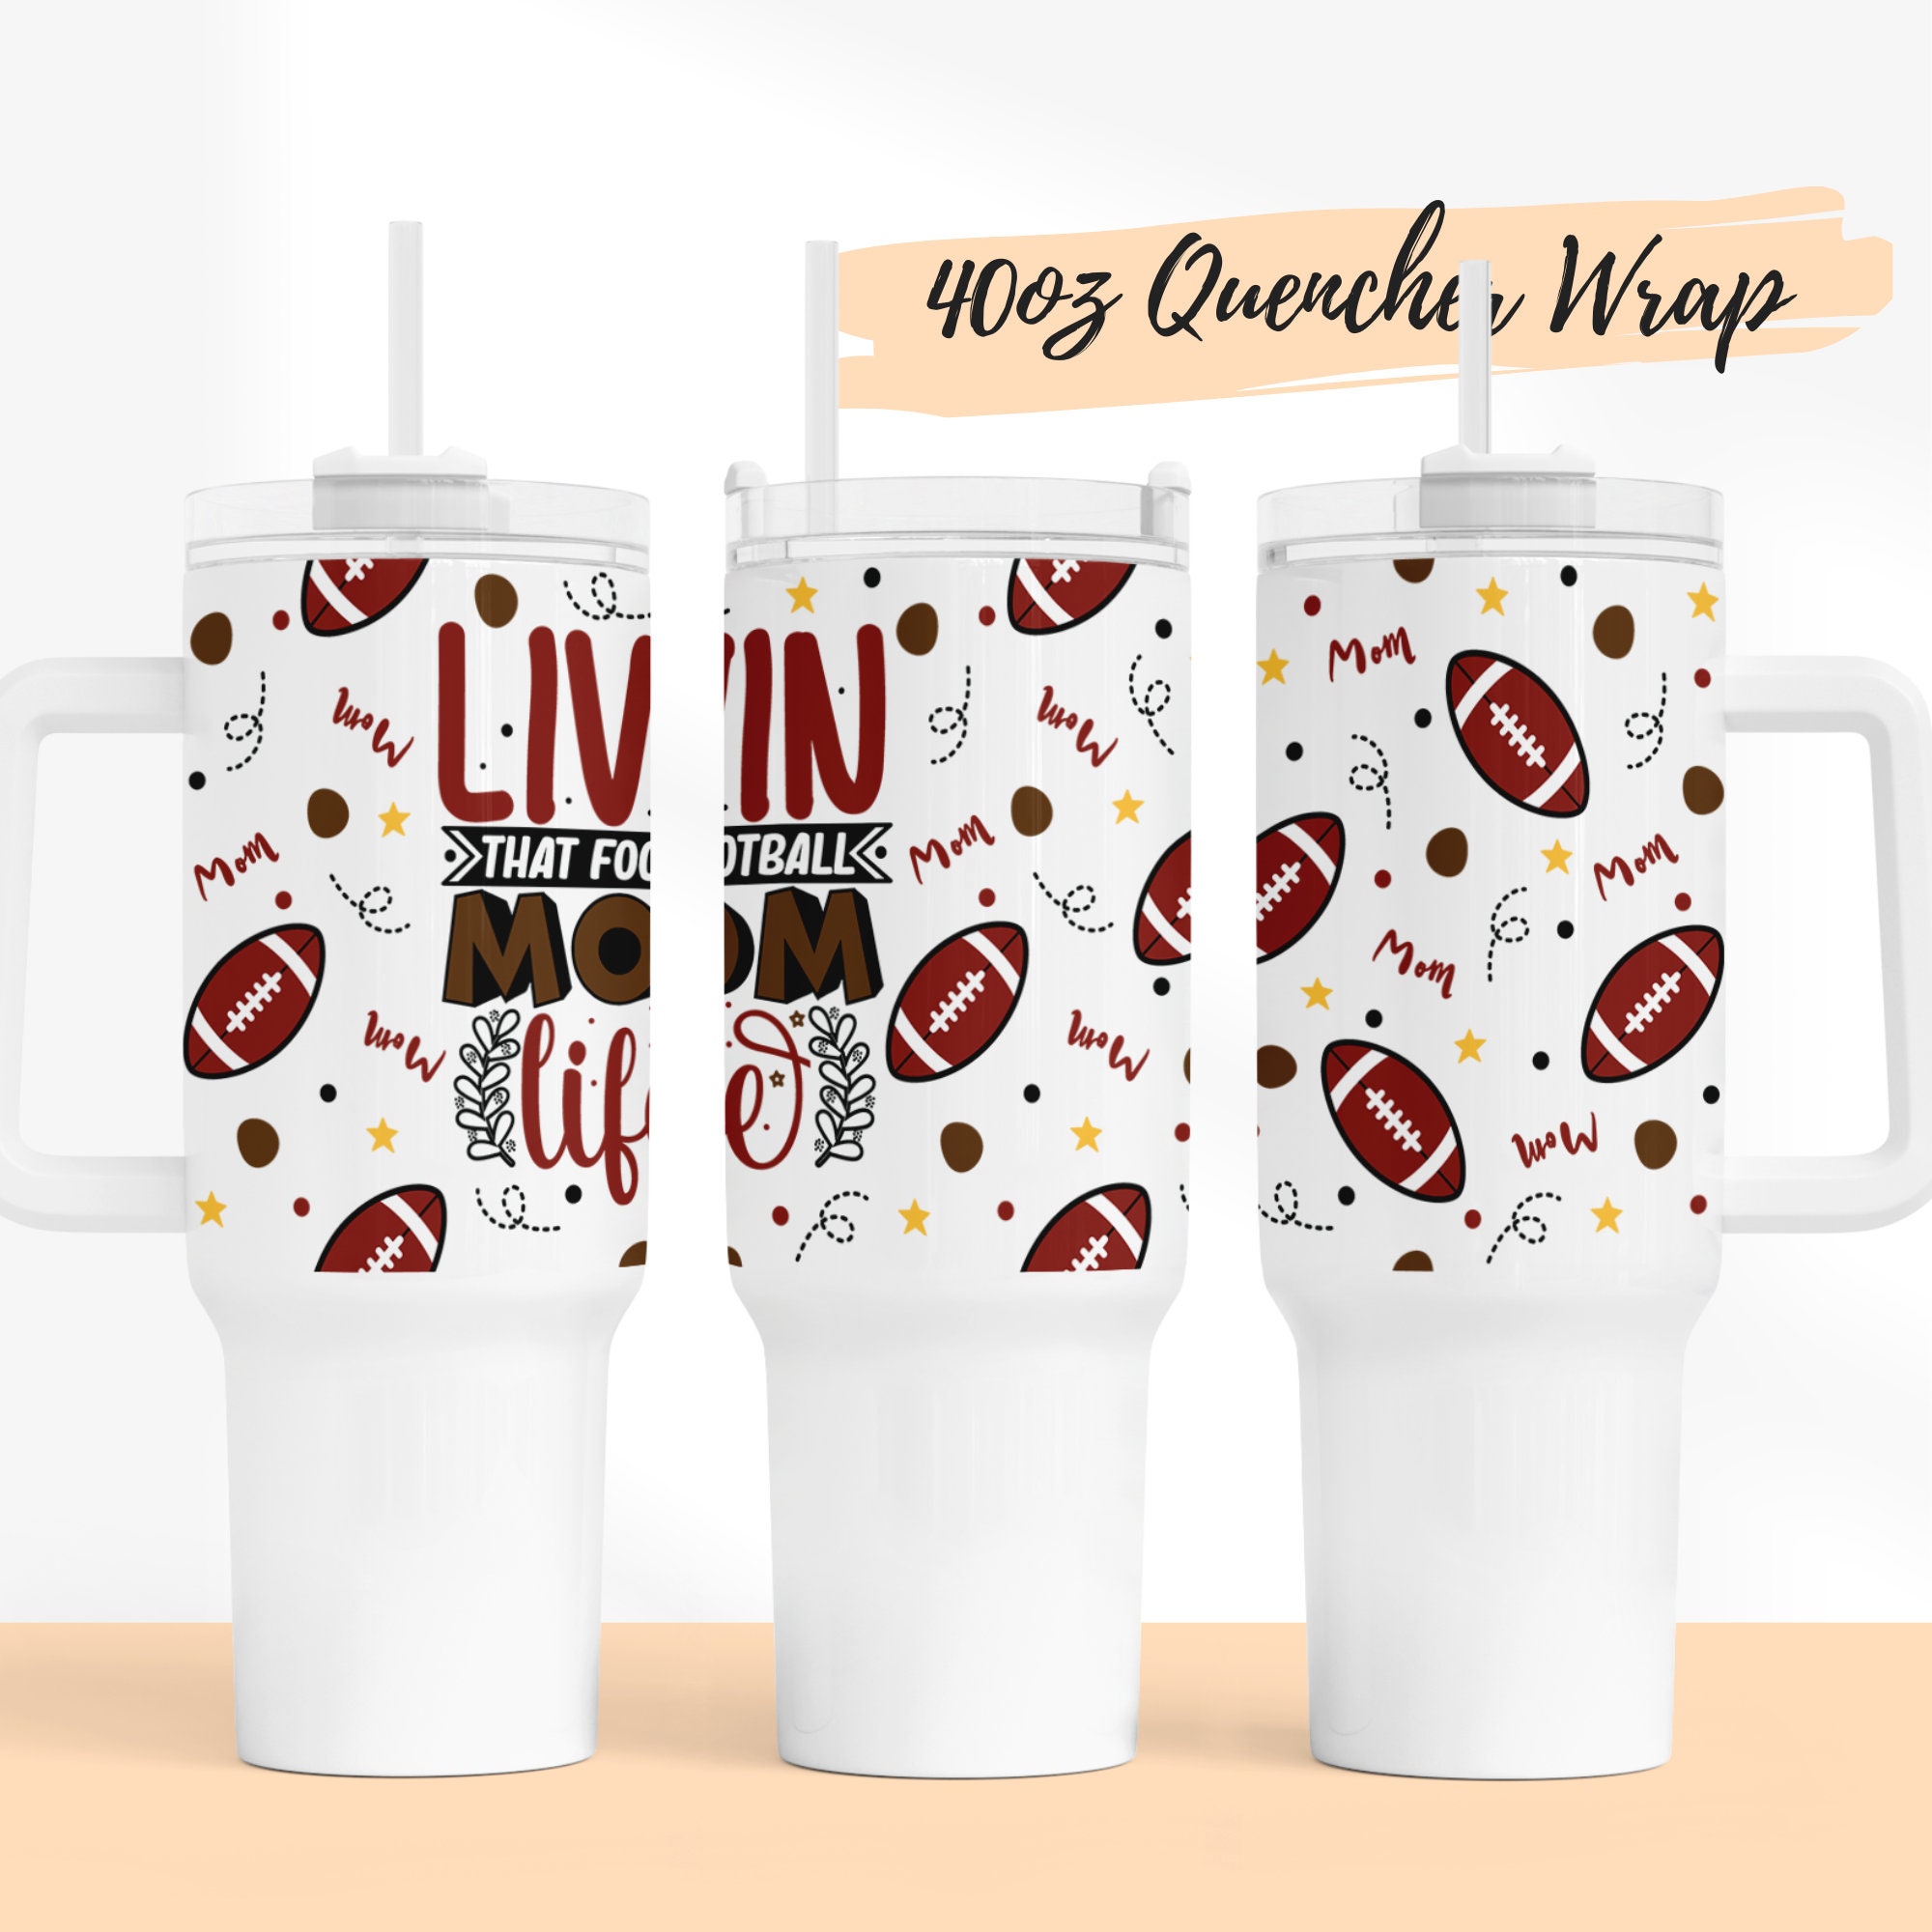 Personalized Football Mom Tumbler 40oz with Handle,American Mom Tumbler  Leopard Print,Football Mom C…See more Personalized Football Mom Tumbler  40oz